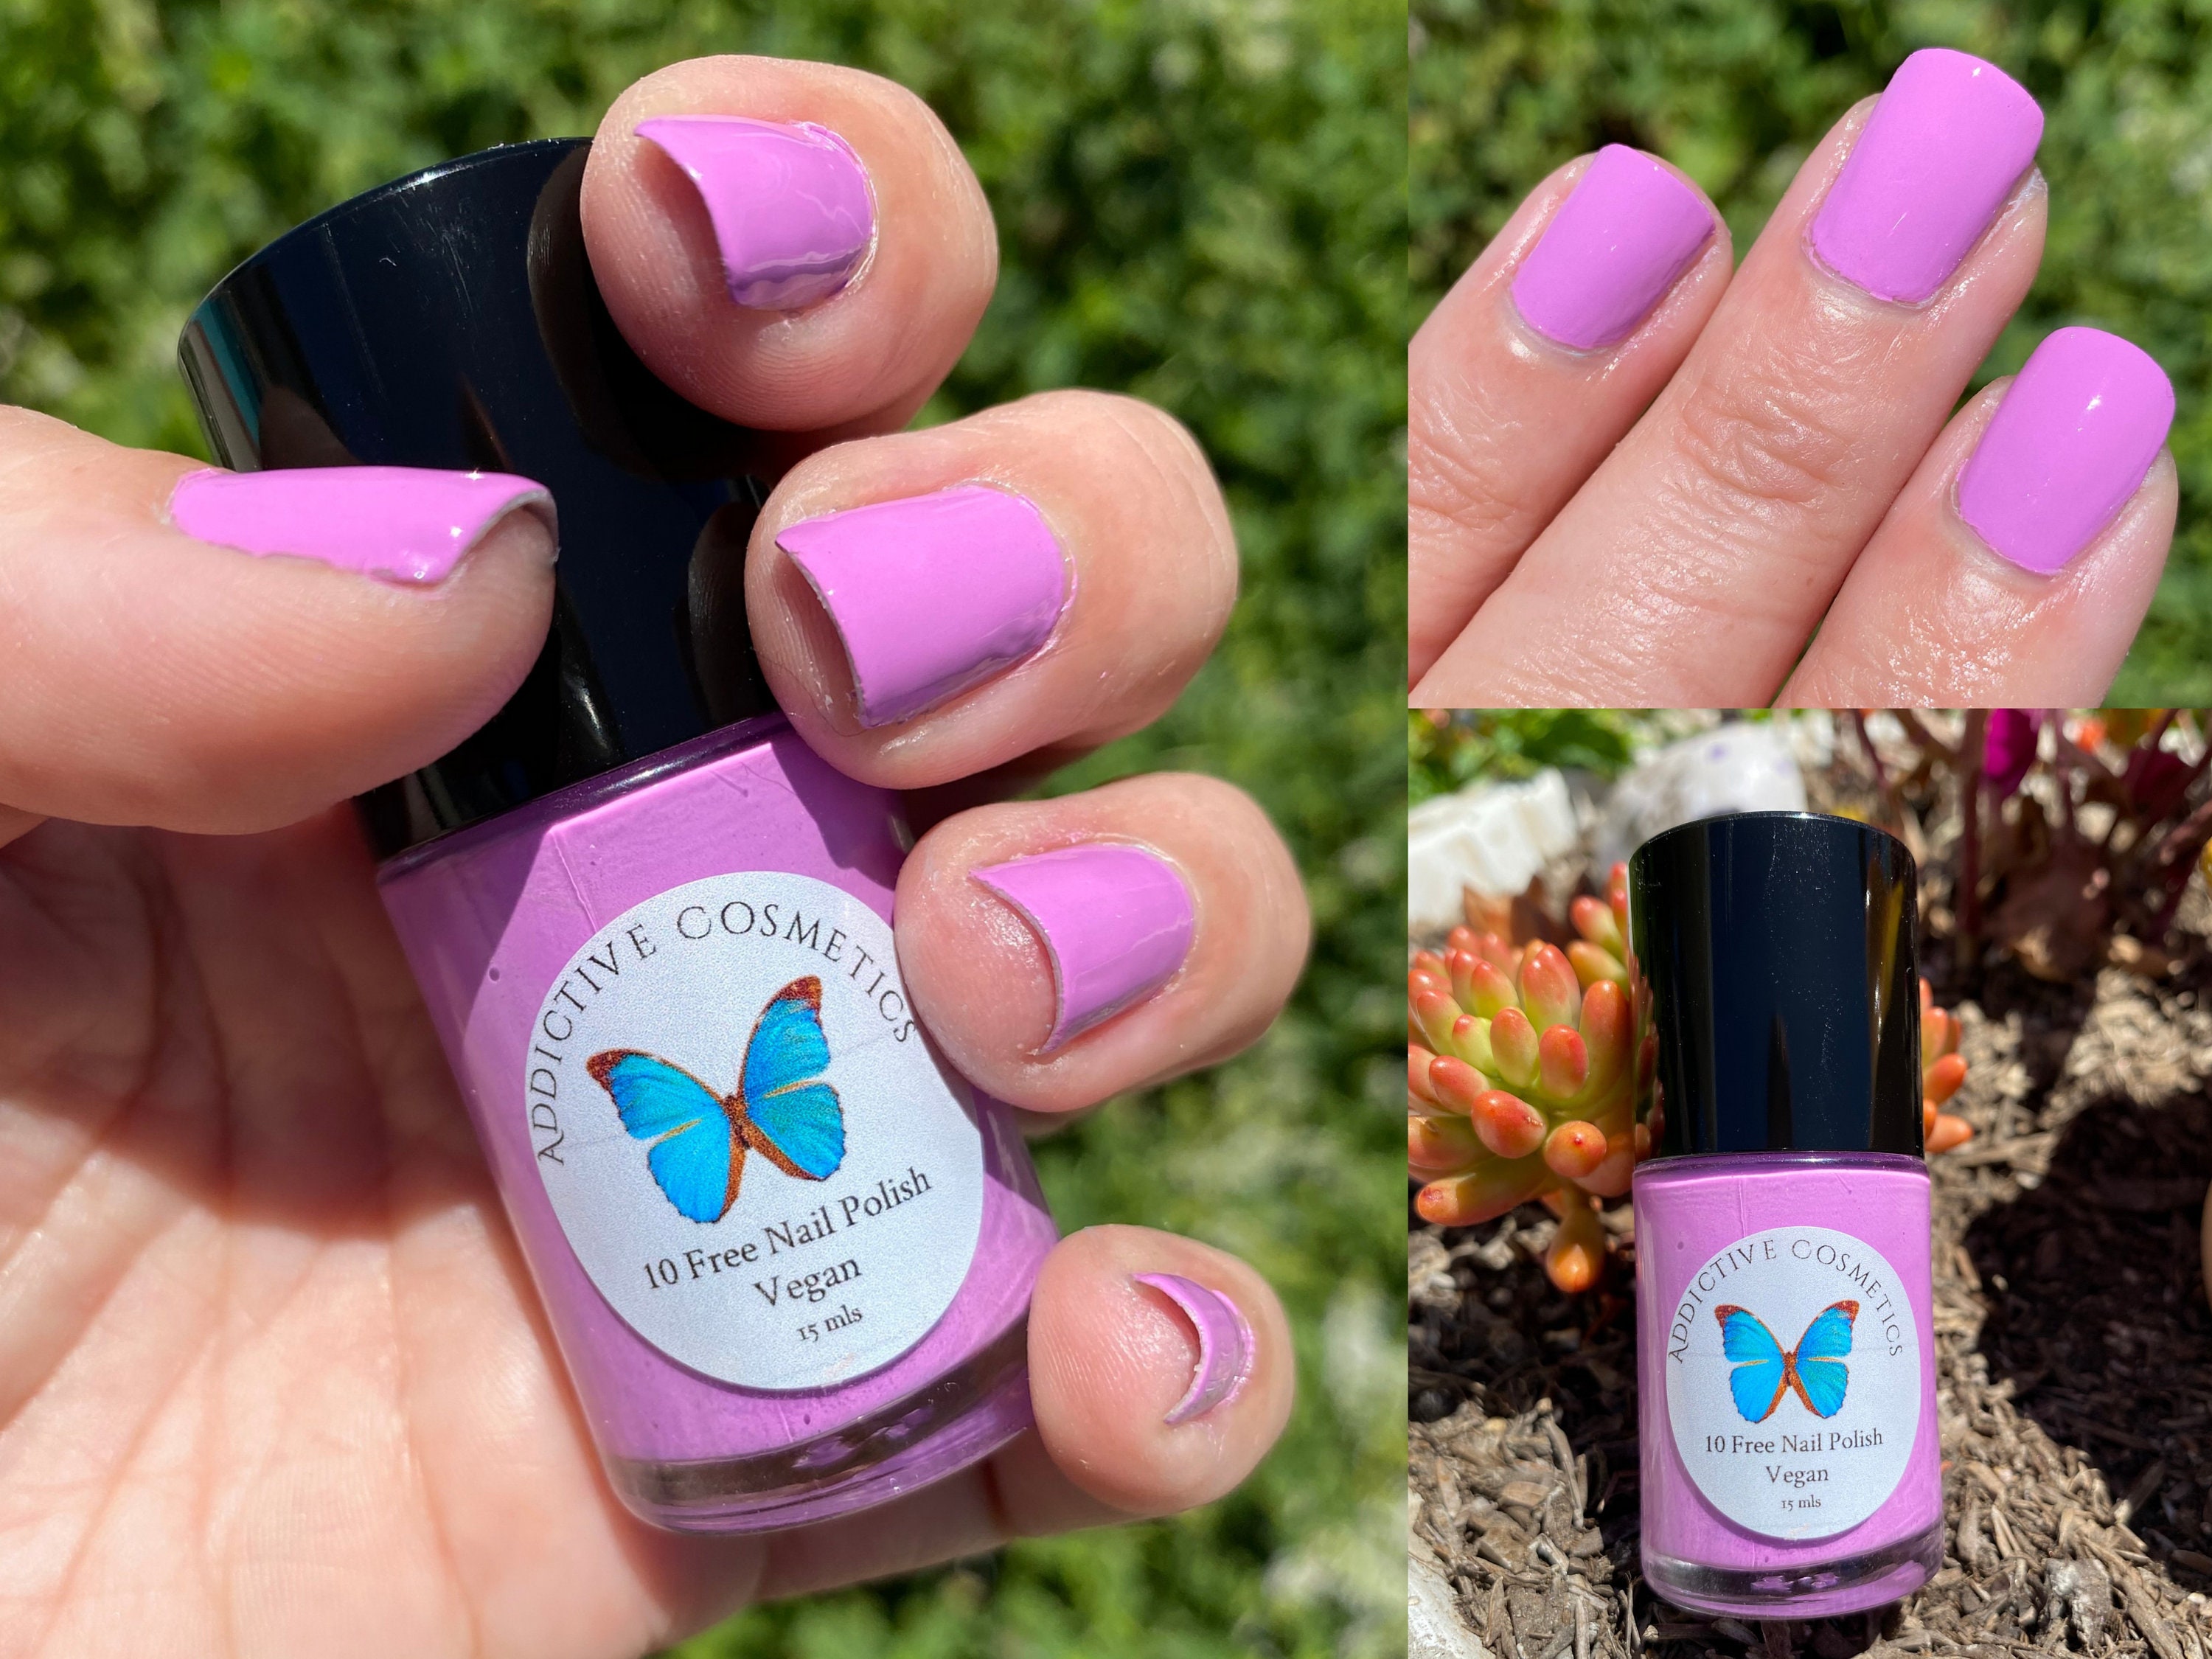 What is 10 Free Nail Polish? – Mented Cosmetics